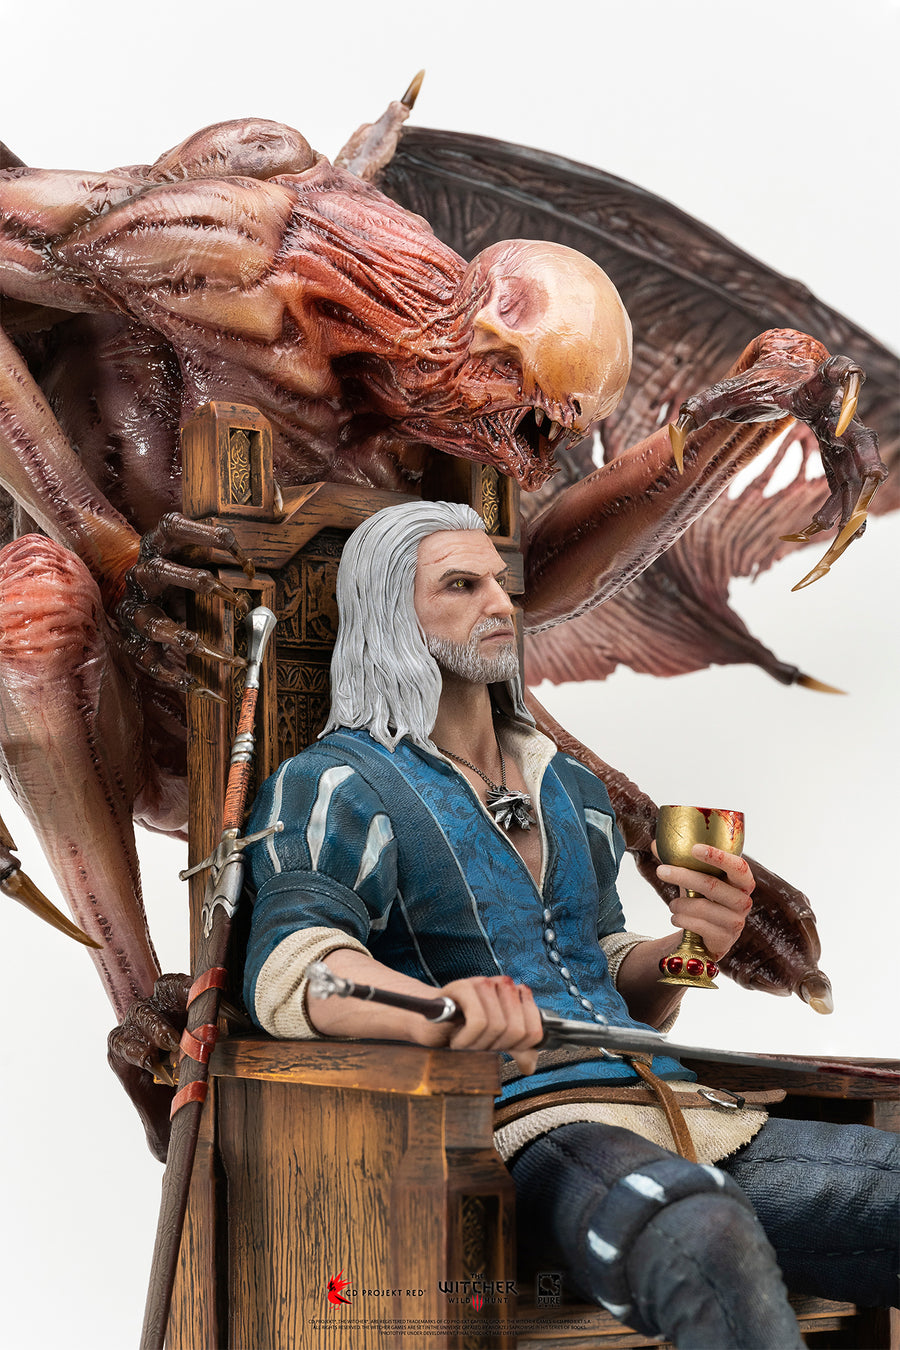 The Witcher 3: Wild Hunt Geralt 1/4 Scale Deluxe Statue Exclusive Edition